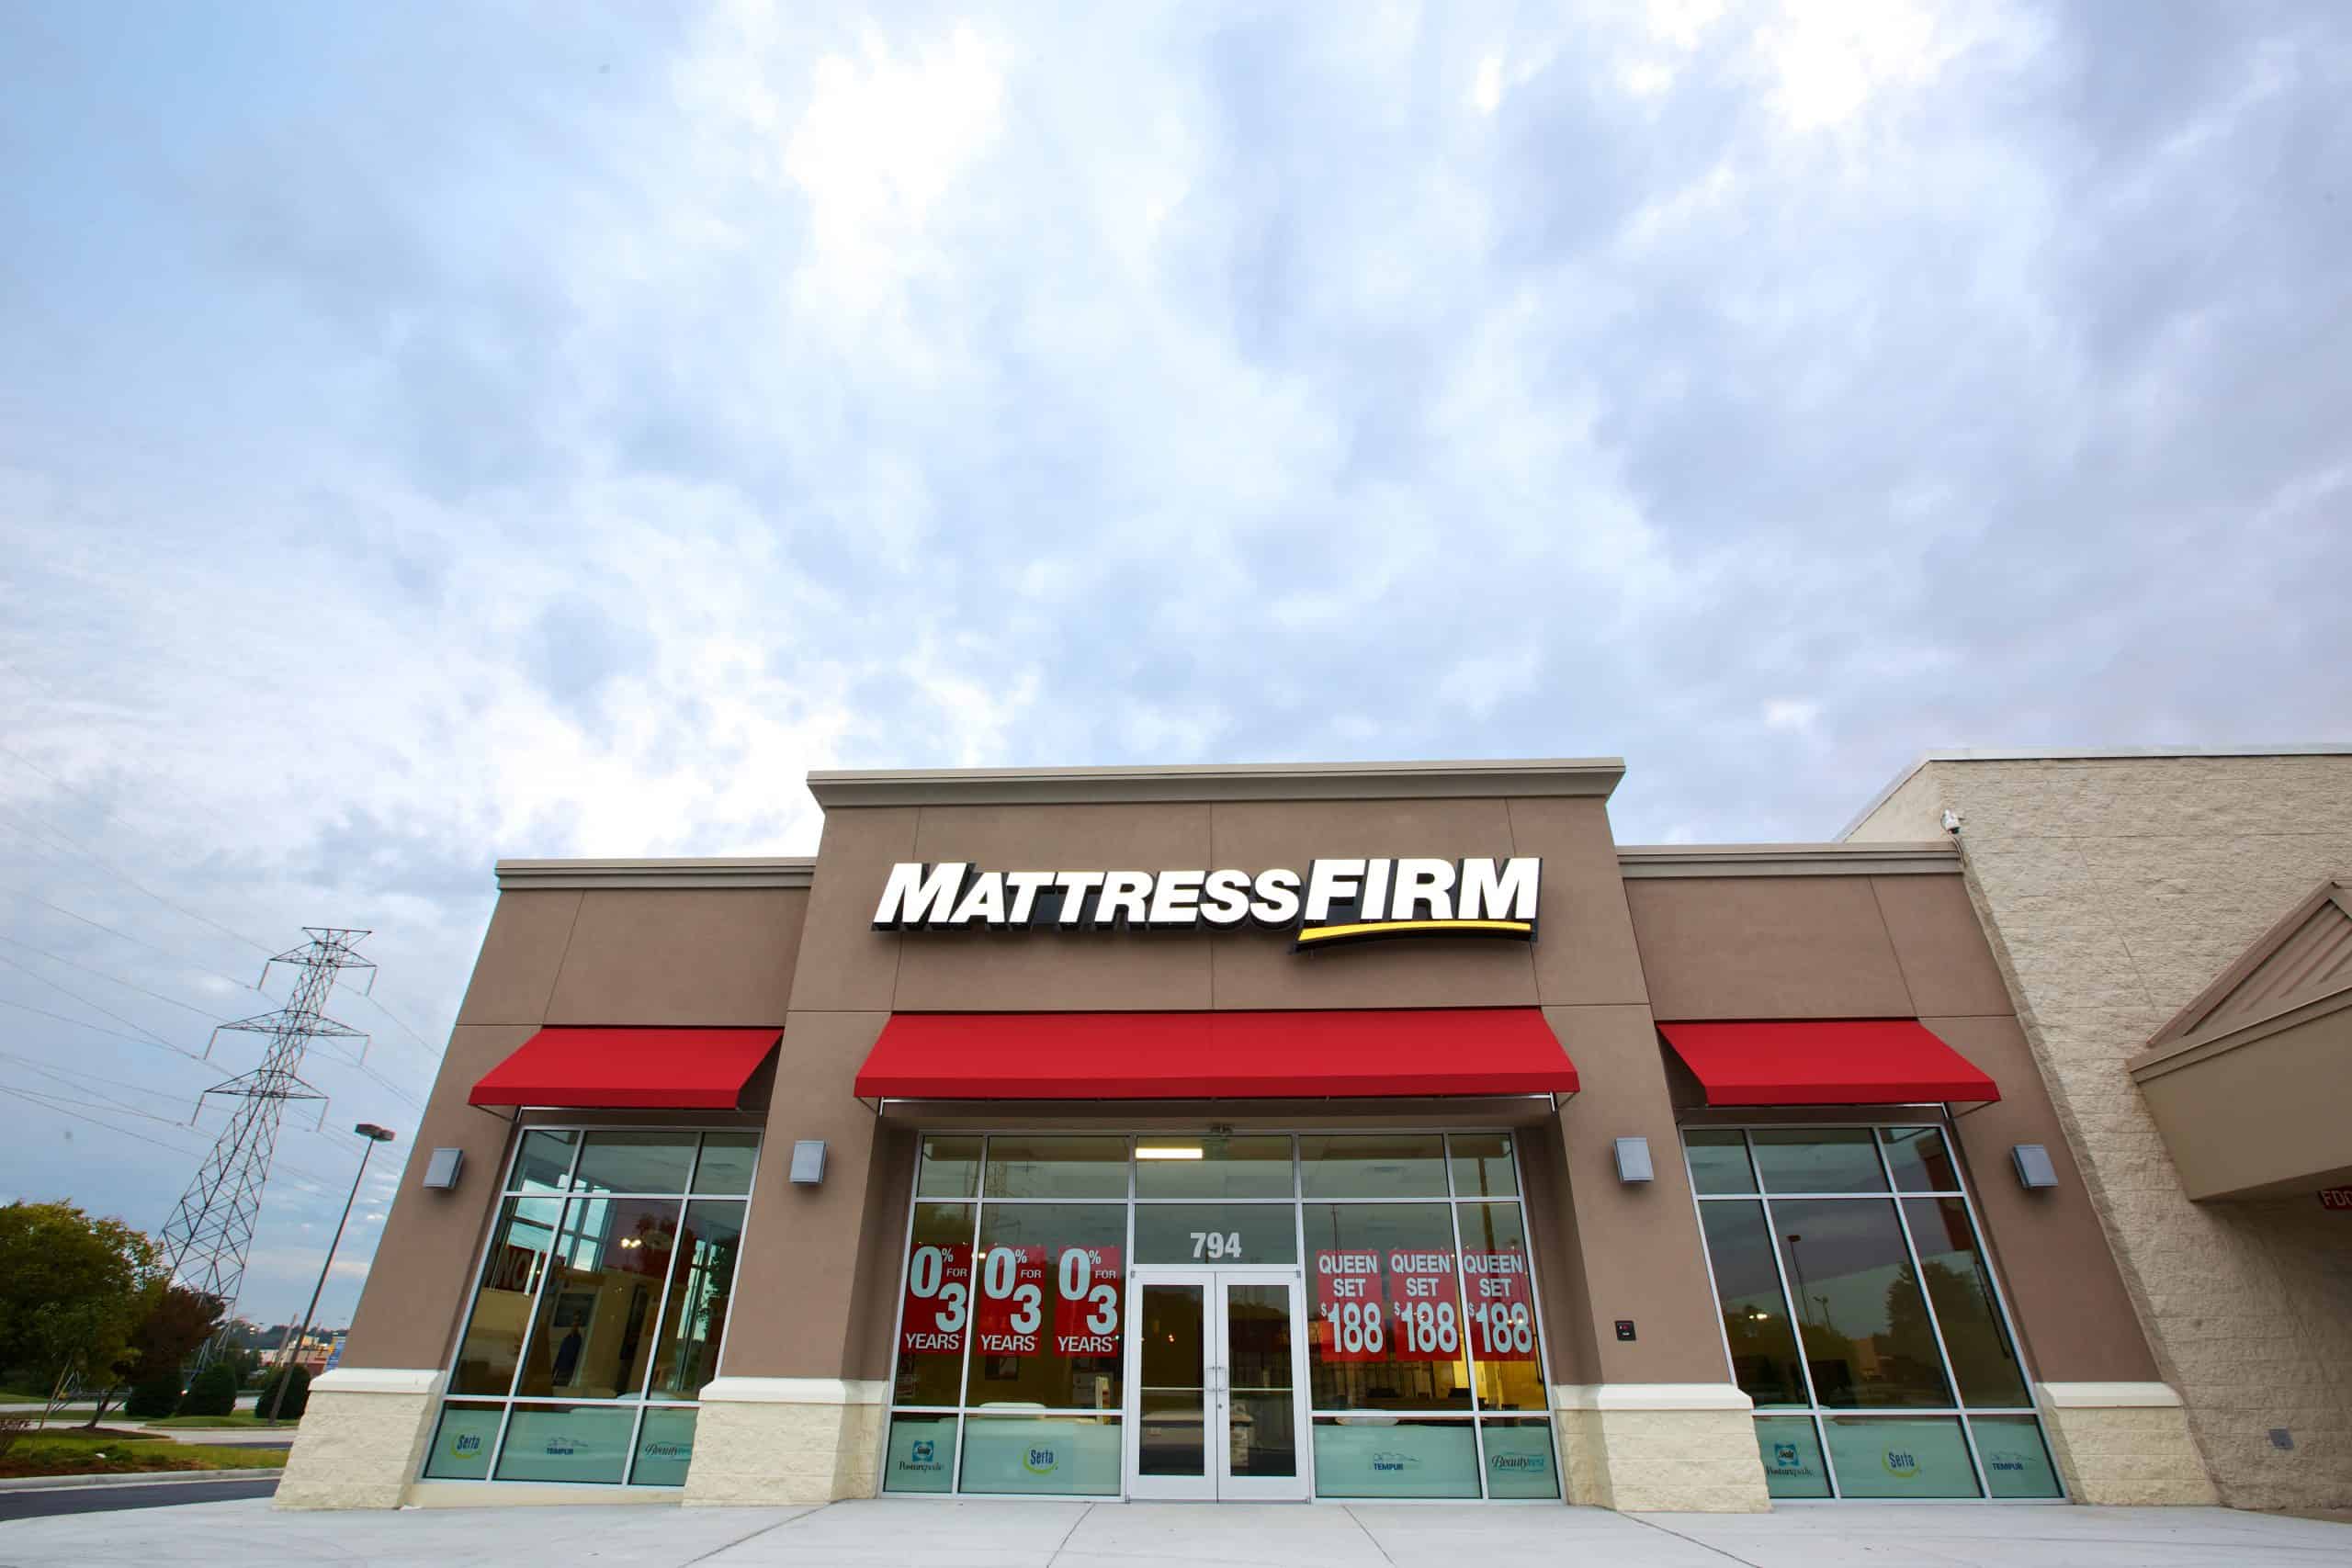 Outside view of Mattress Firm building in Rocky Mount, NC.